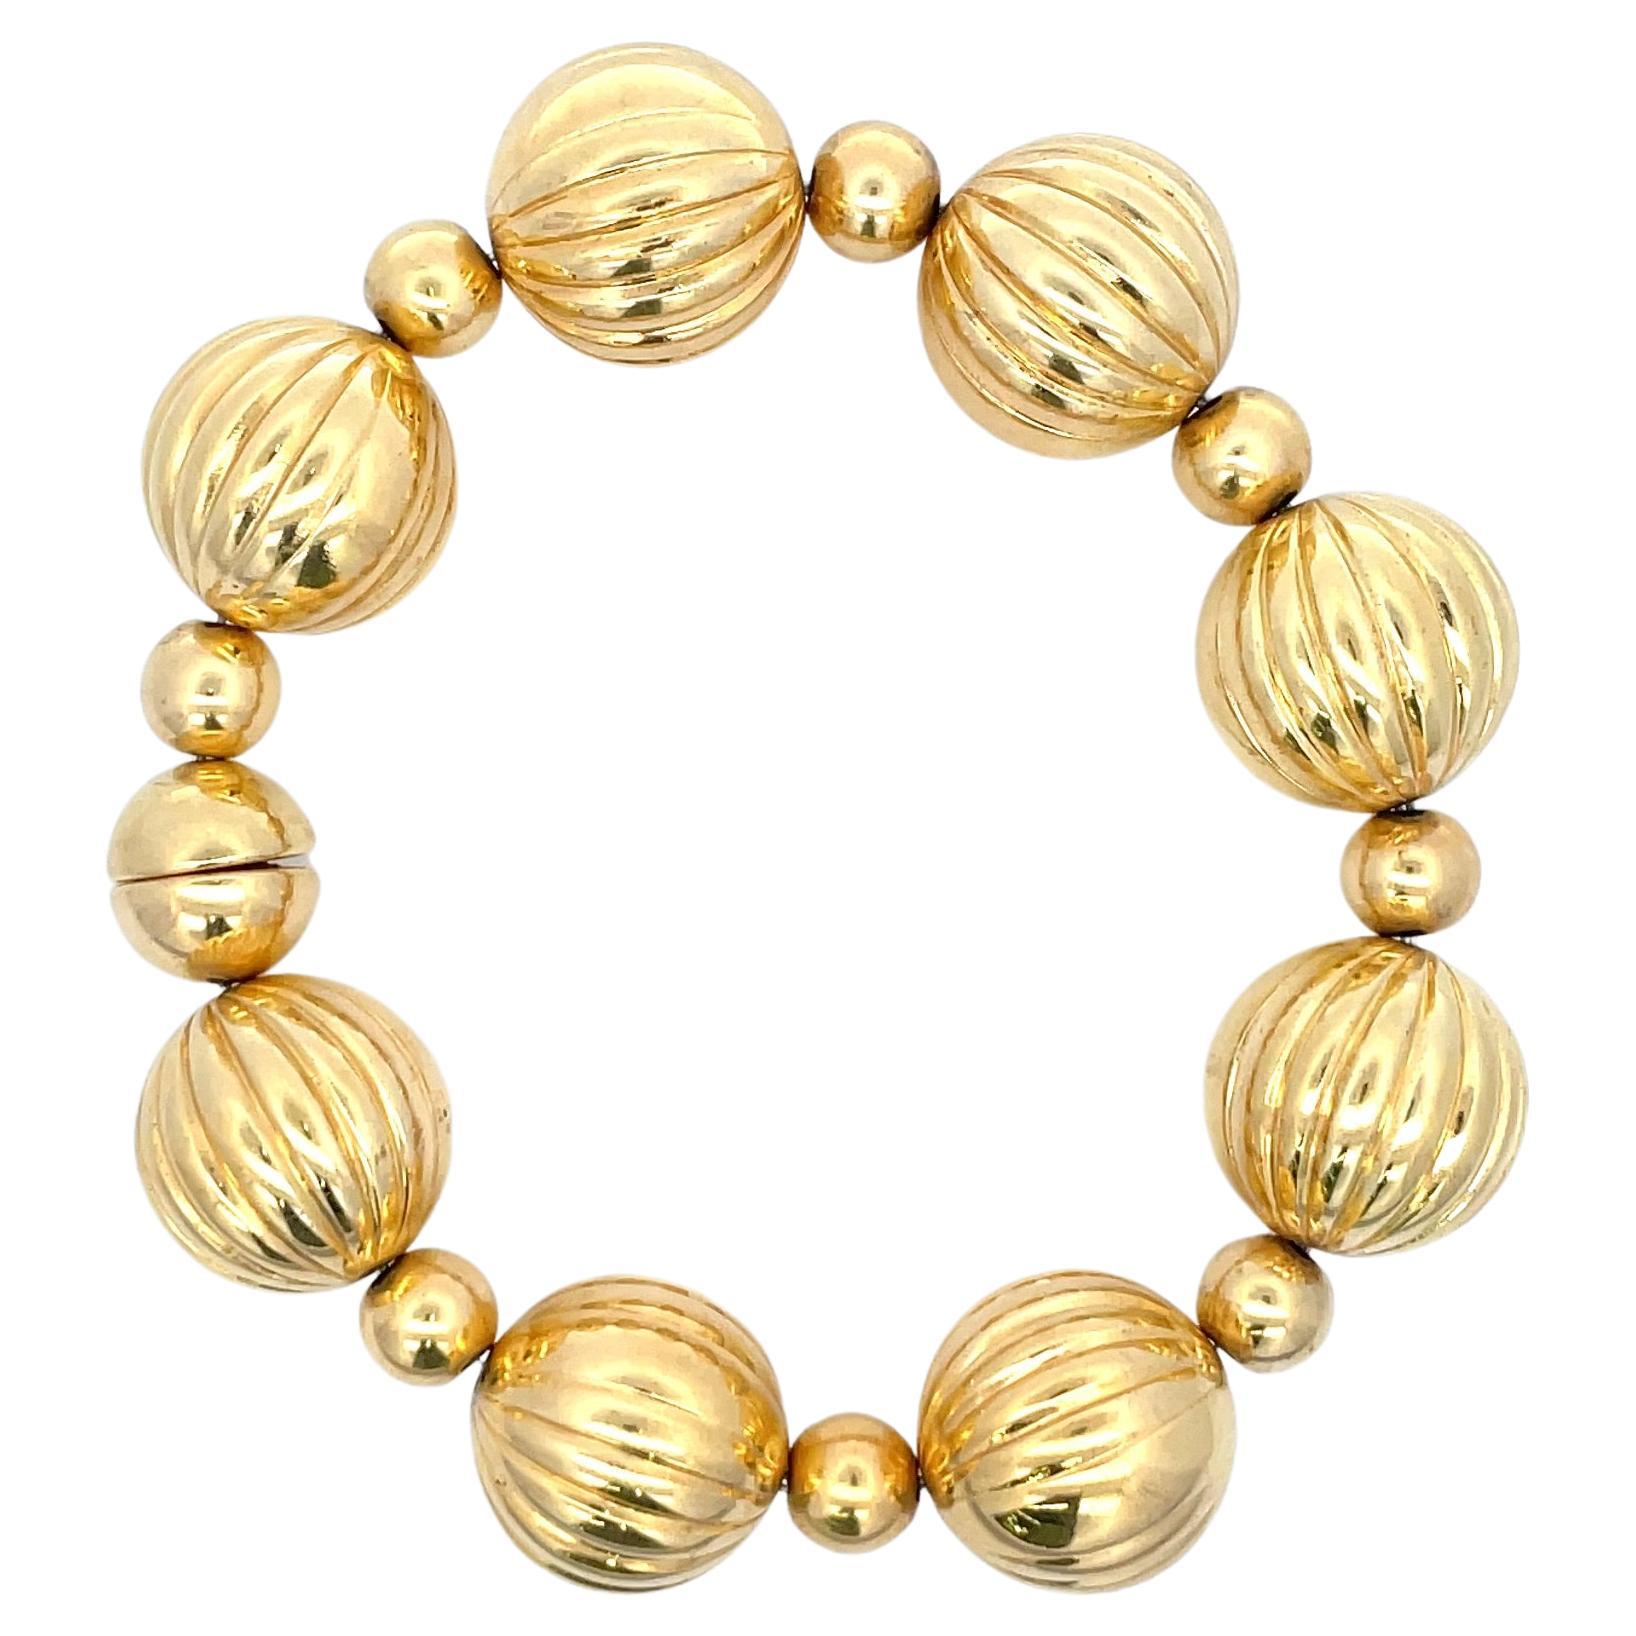 Milor 14 Karat yellow gold bracelet featuring 8 large ball motifs measuring 17.5 mm in between smaller balls measuring 7.6 mm weighing 31.2 grams, magnet closure. 
More link bracelets available.
Search Harbor Diamonds